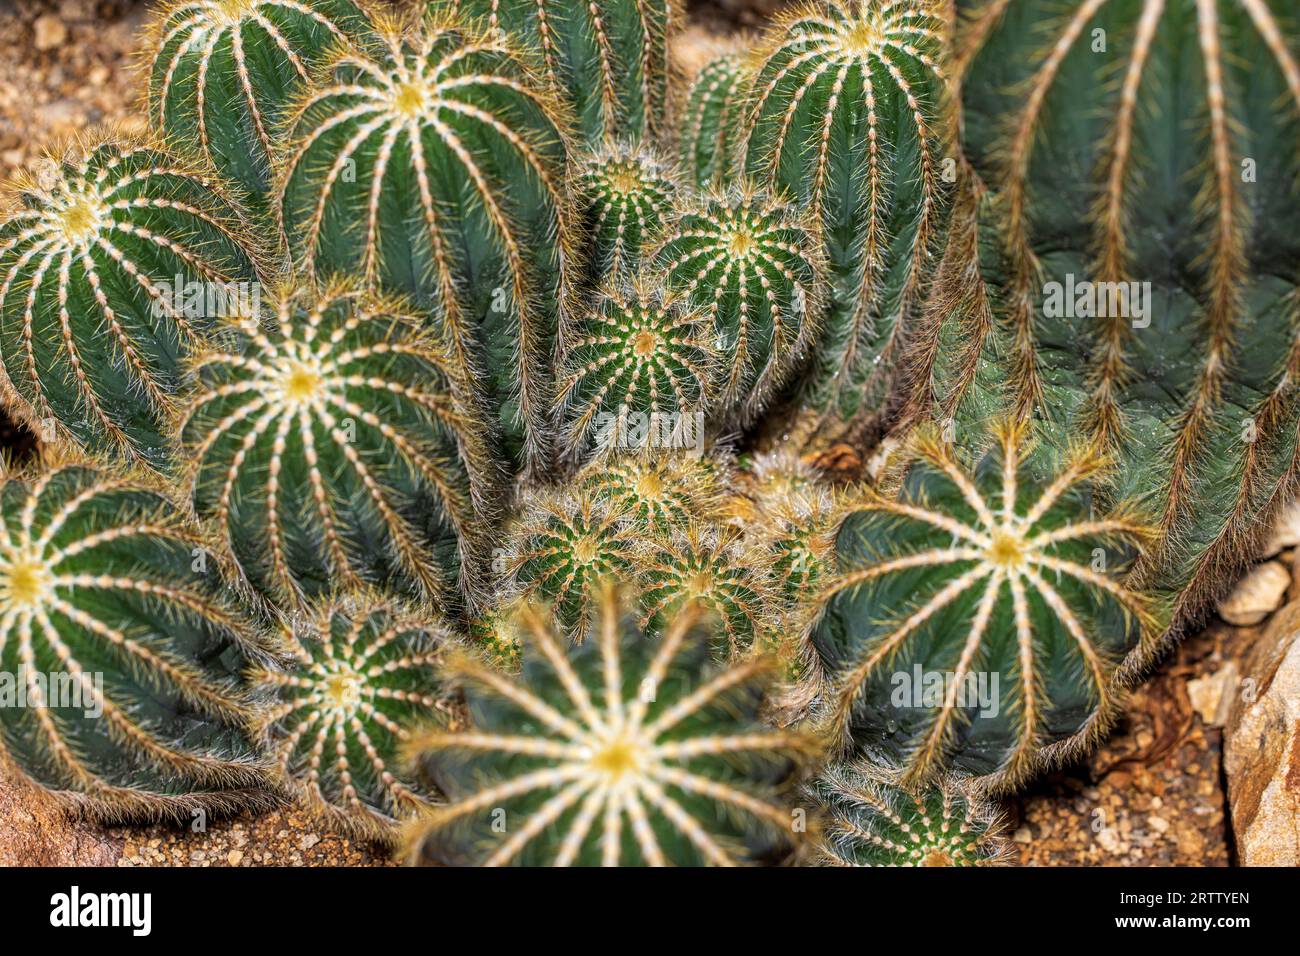 Close-up of Parodia magnifica, species of flowering plant in the family Cactaceae Stock Photo